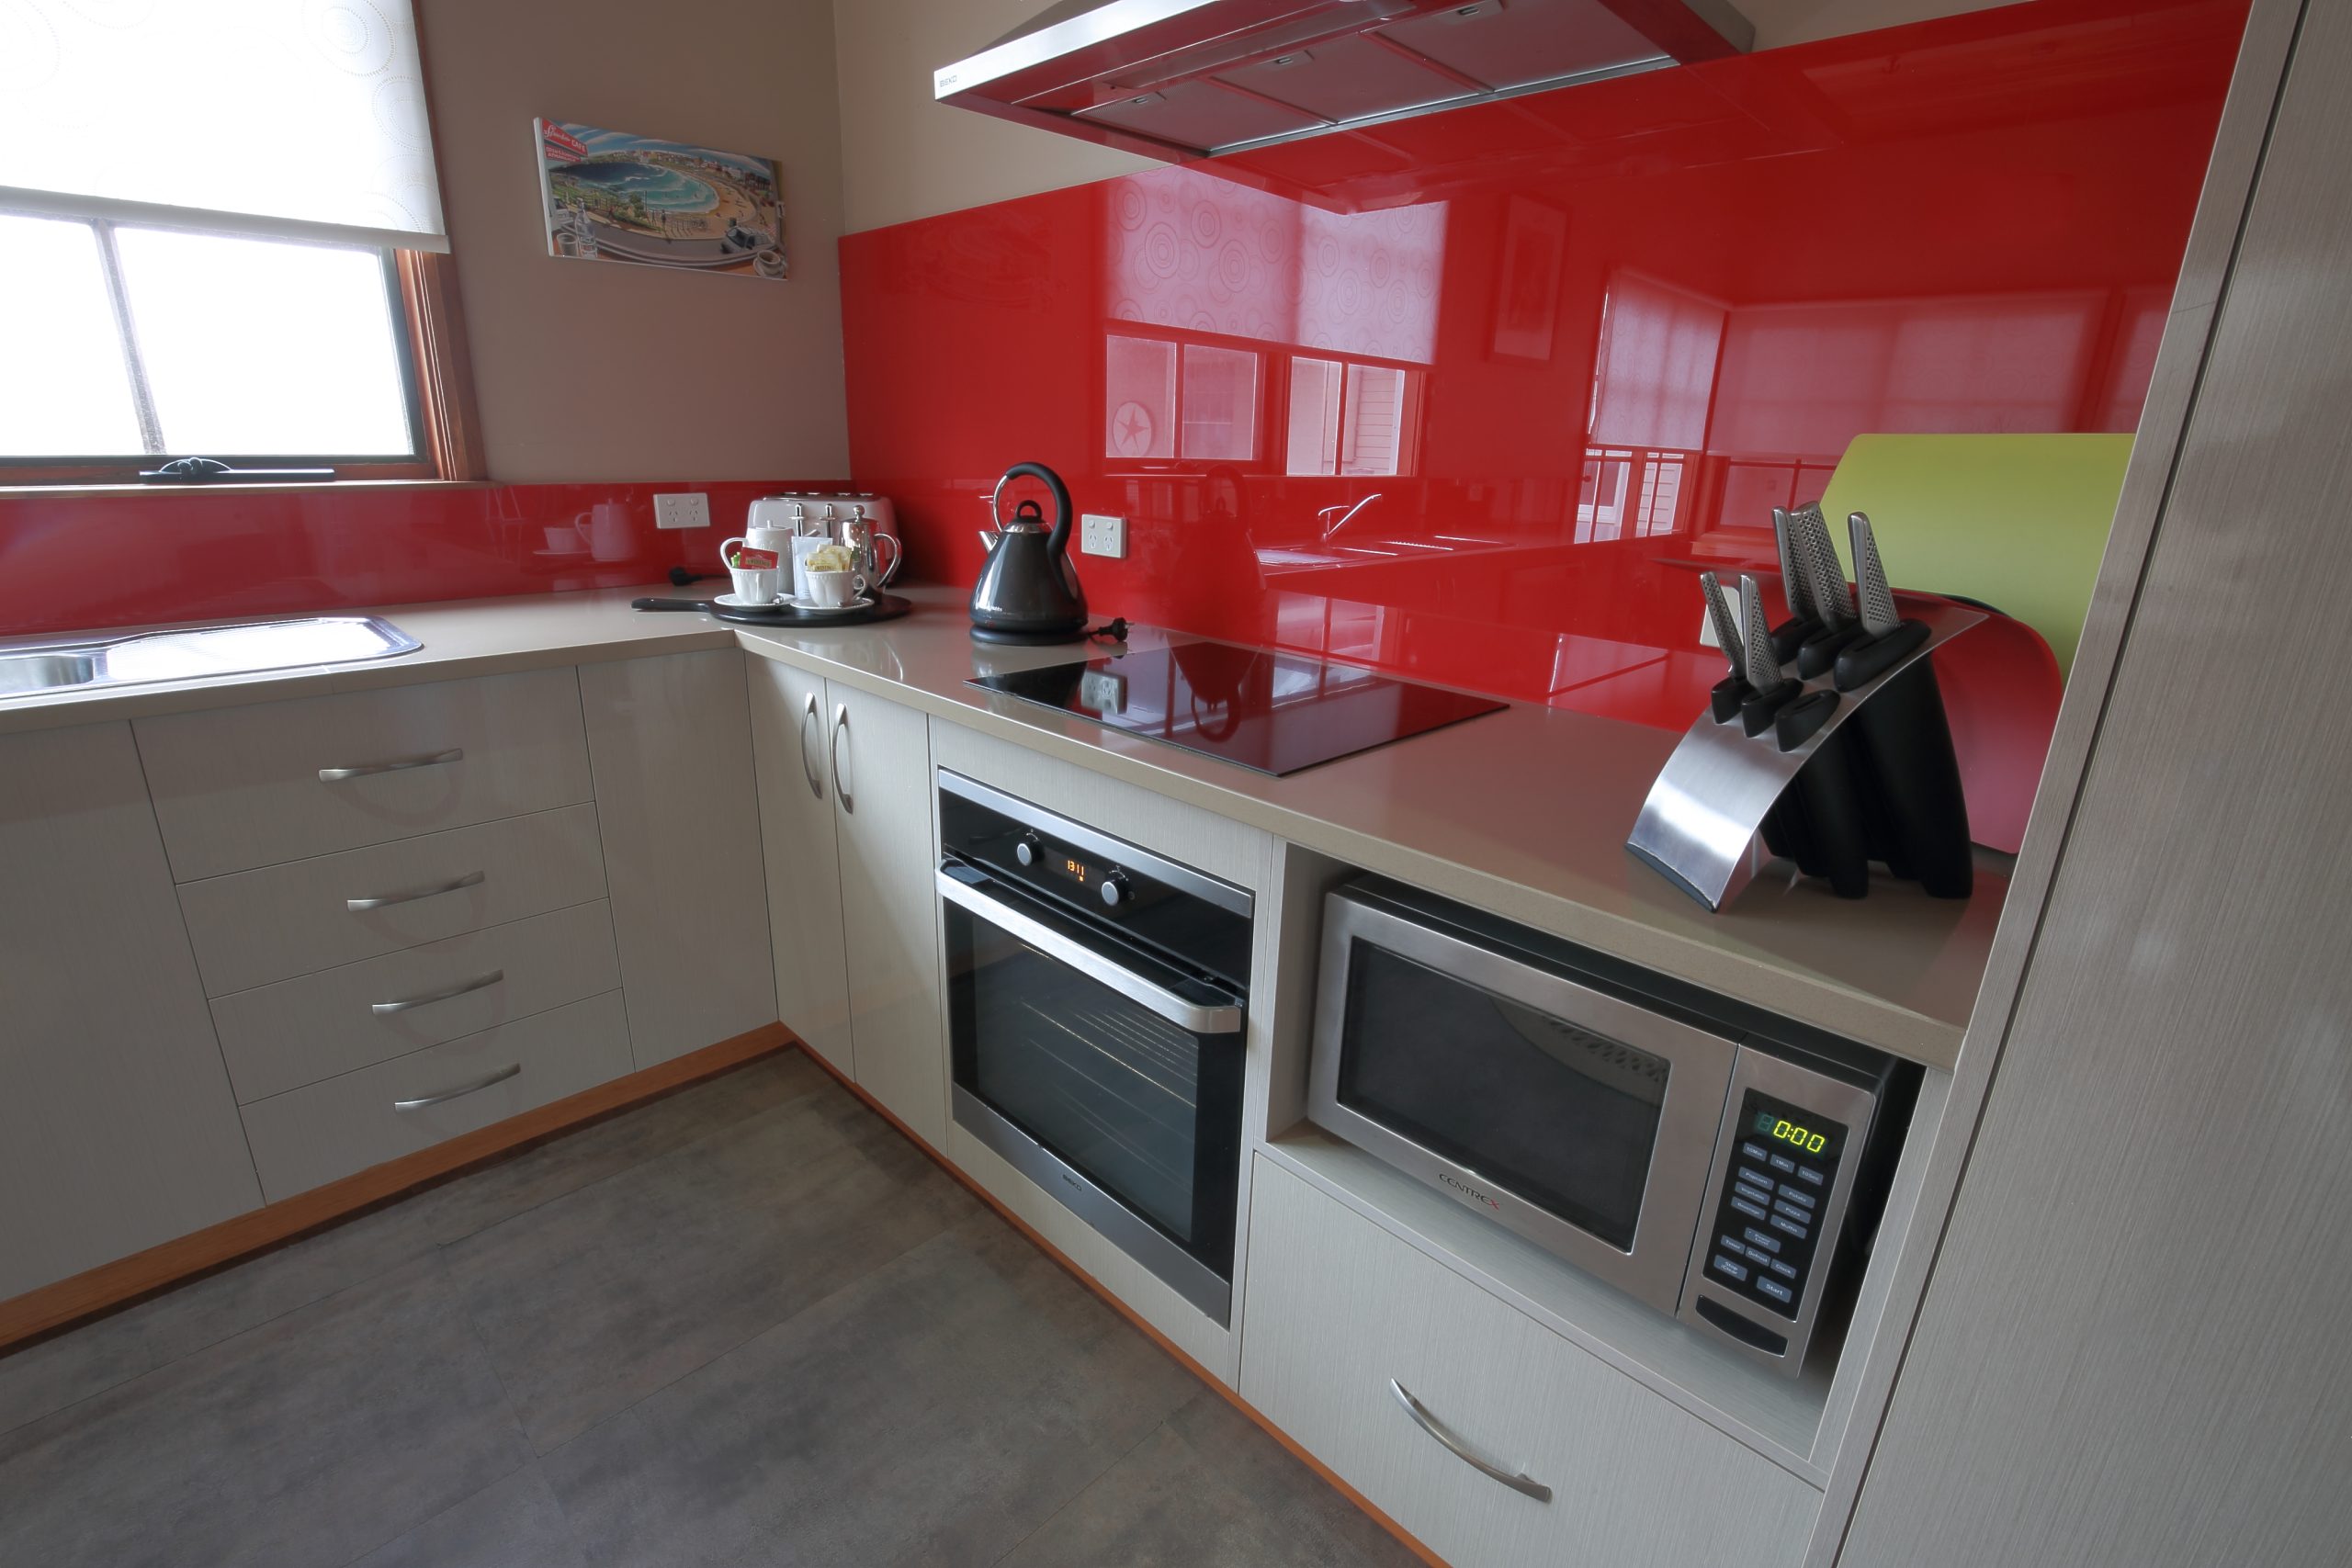 Self-catering. Fully equipped kitchen